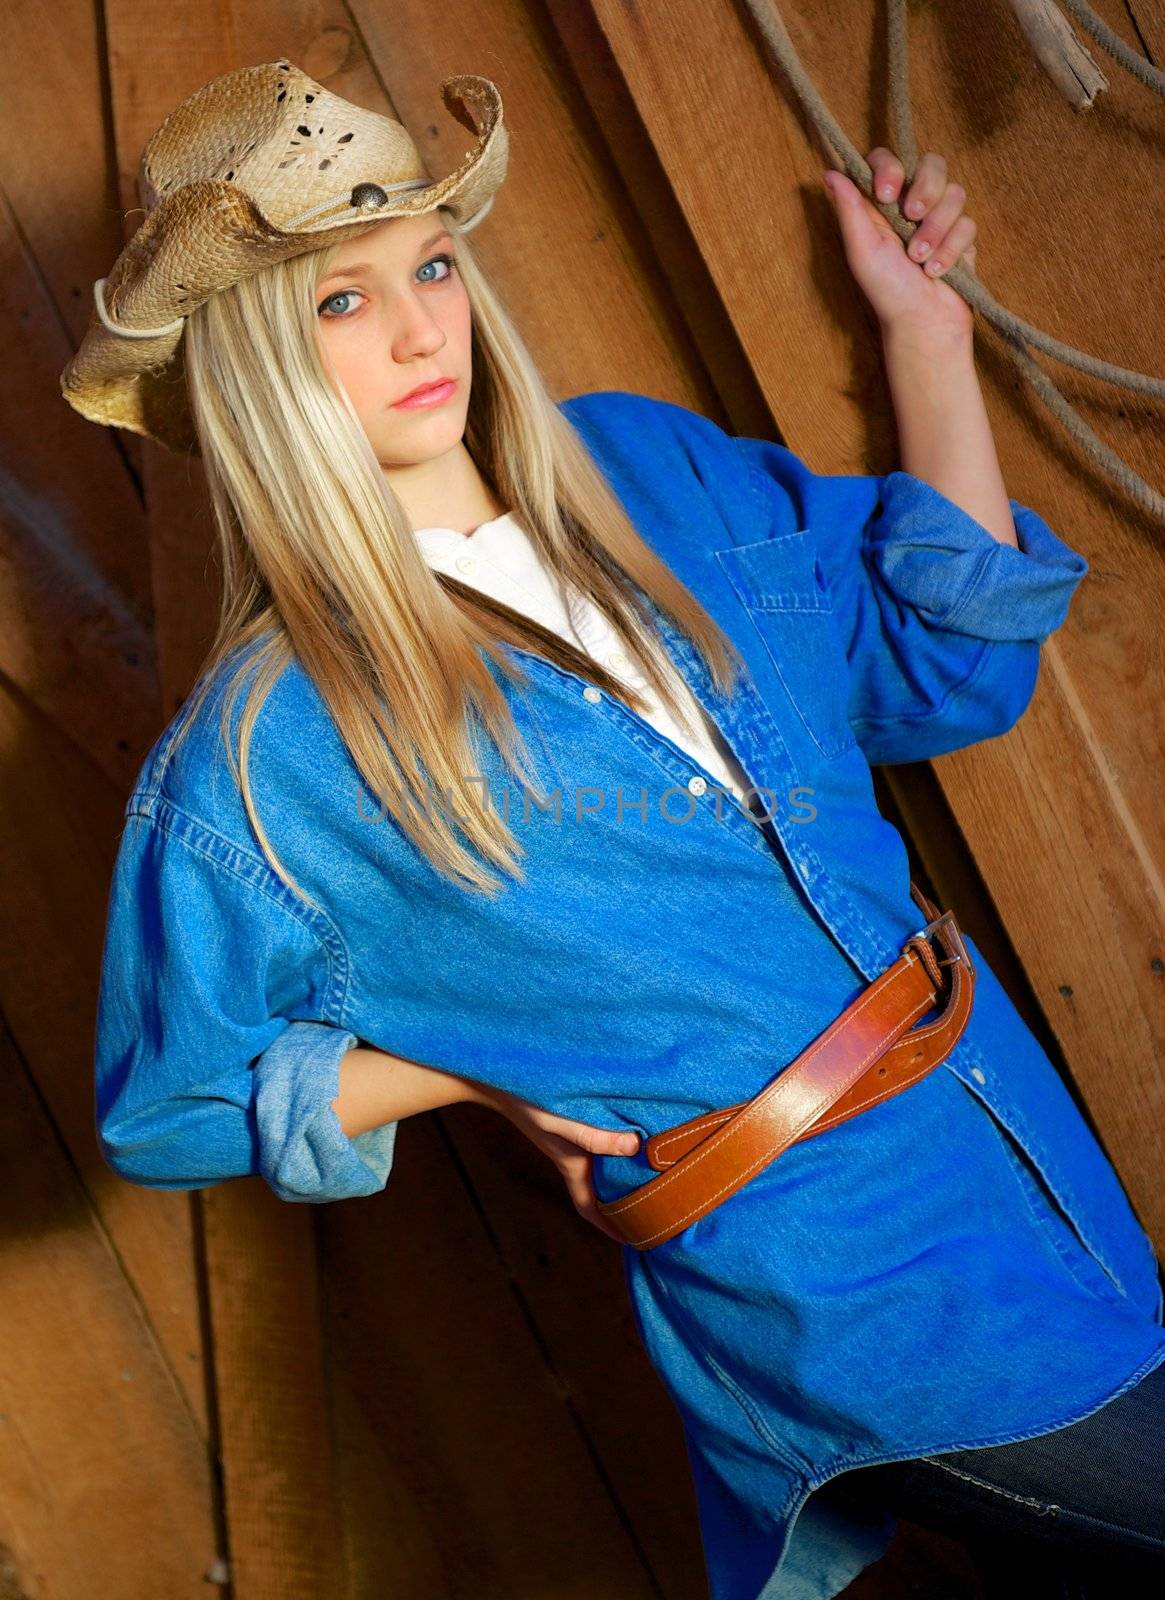 Teen Blond Model with Denim Shirt and Cowboy Hat by pixelsnap